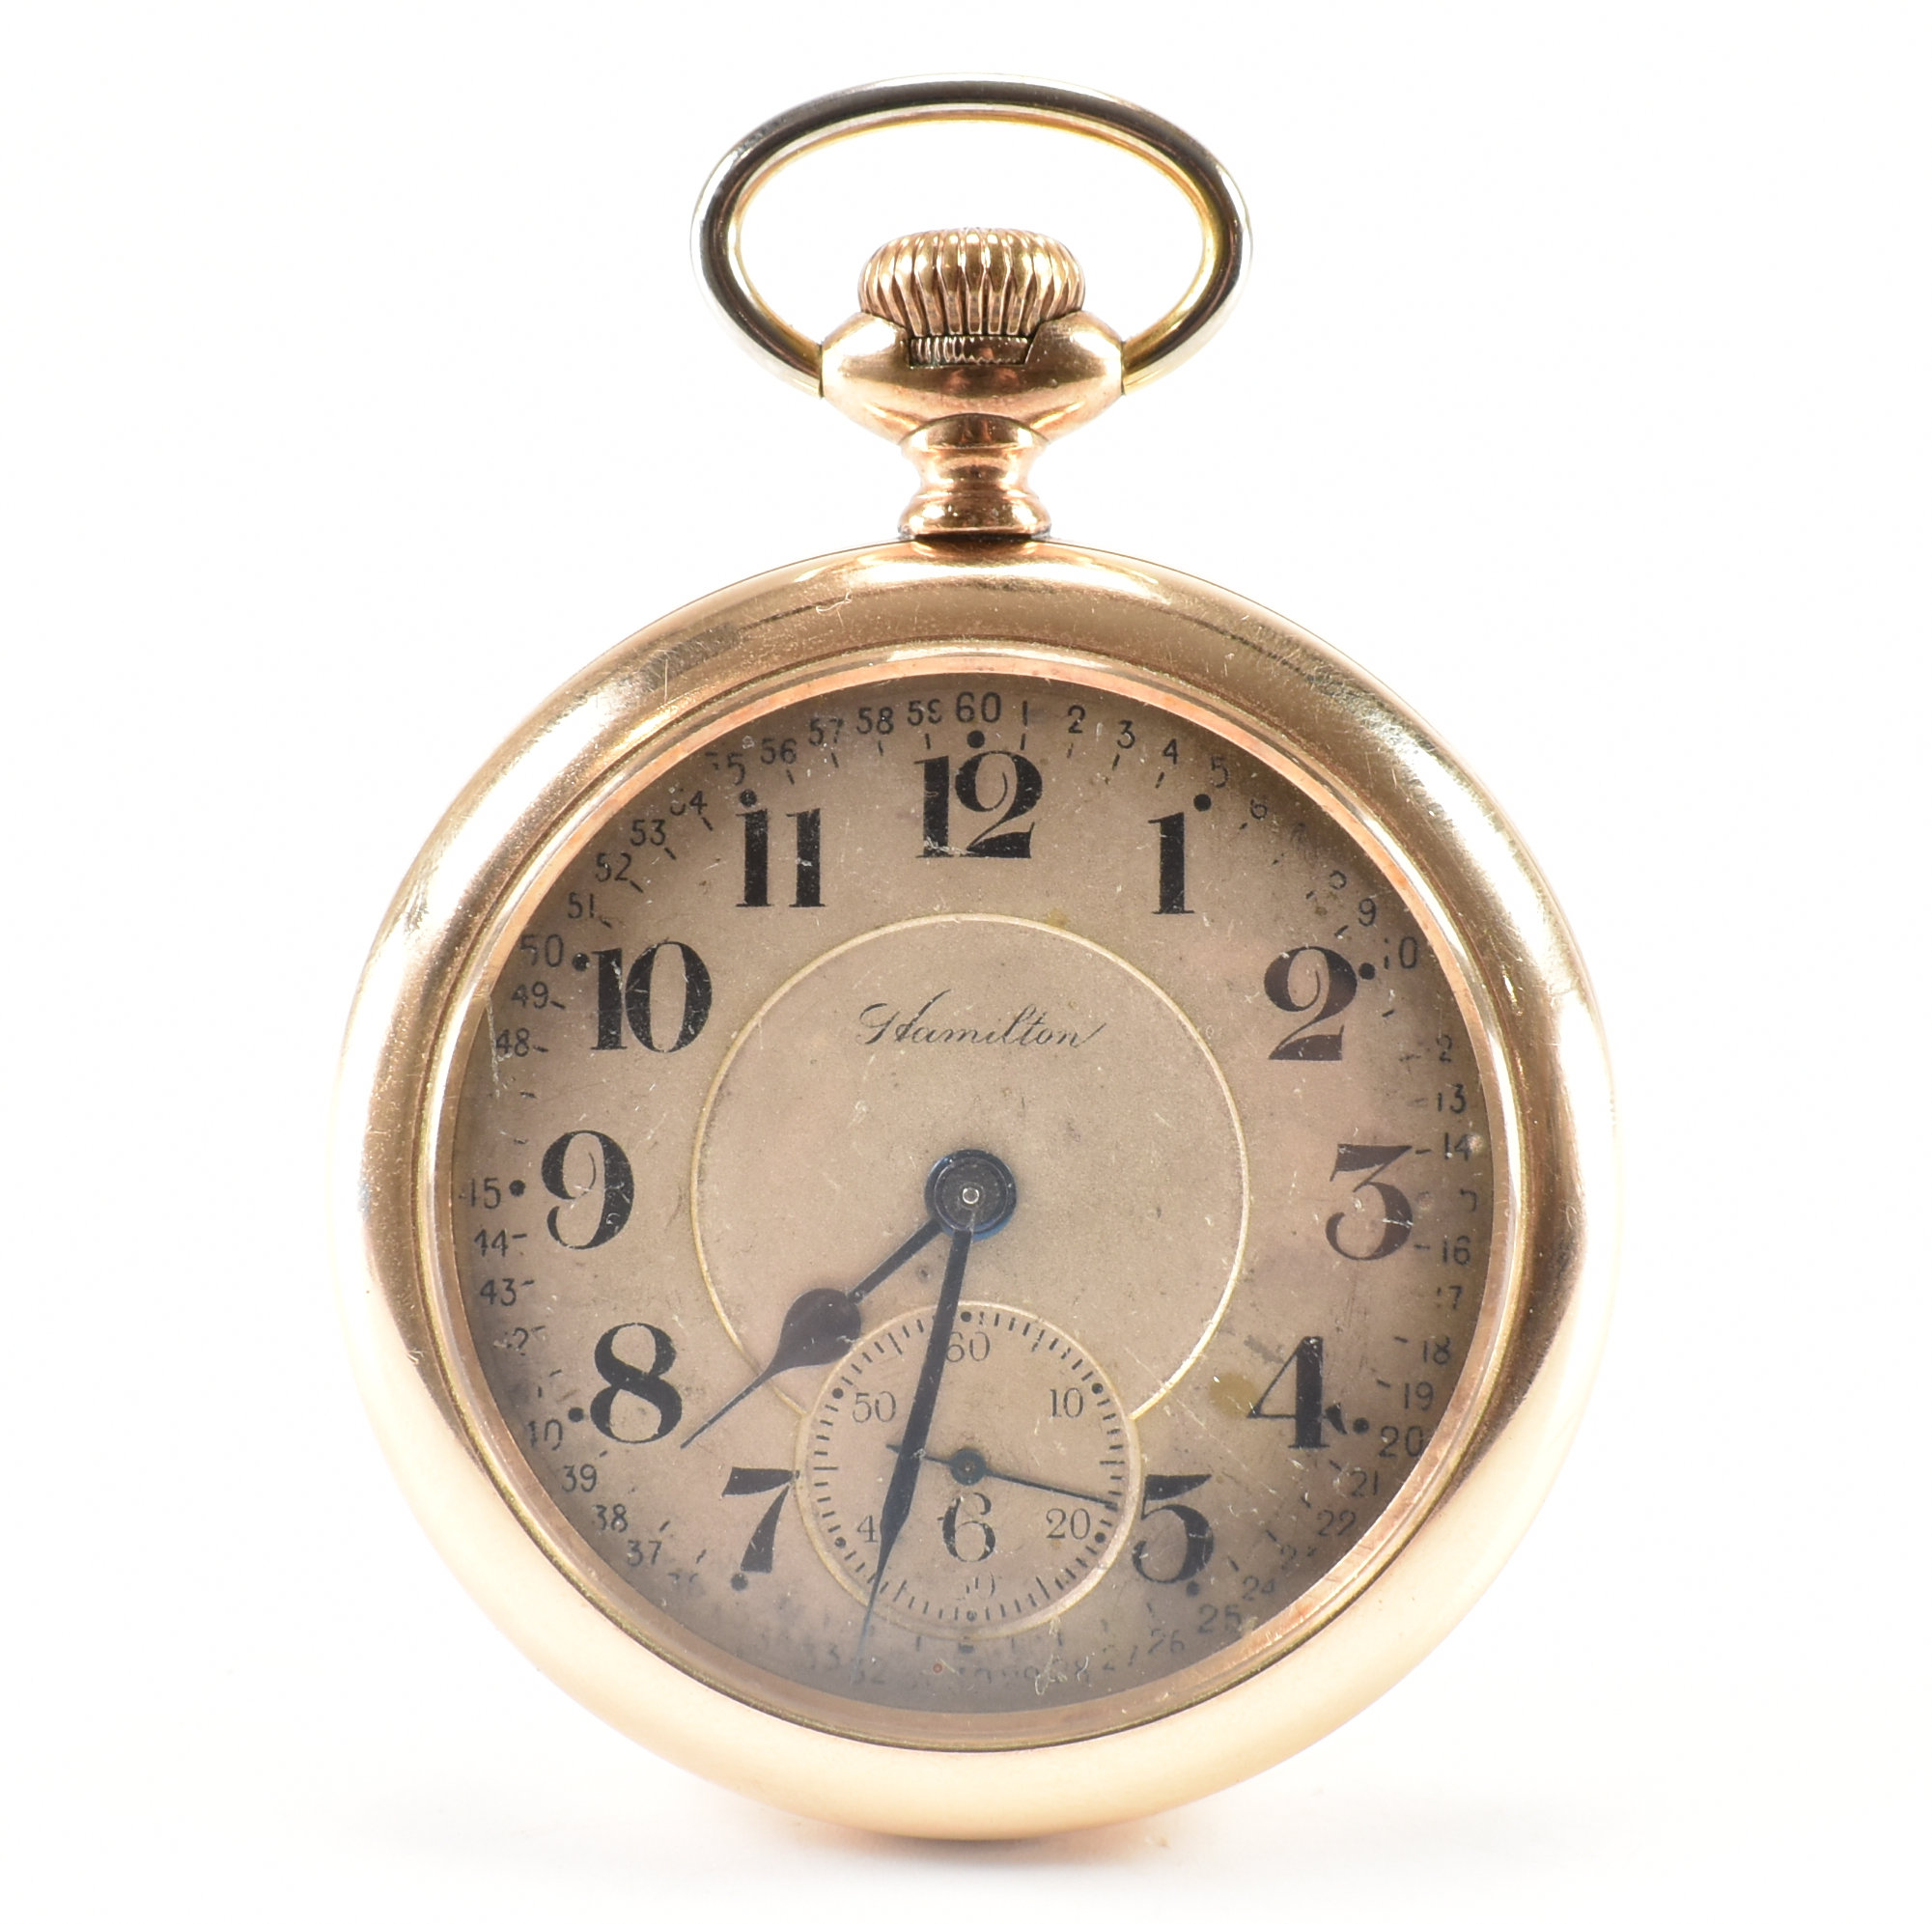 ANTIQUE HAMILTON WATCH COMPANY GOLD PLATED POCKET WATCH - Image 2 of 9